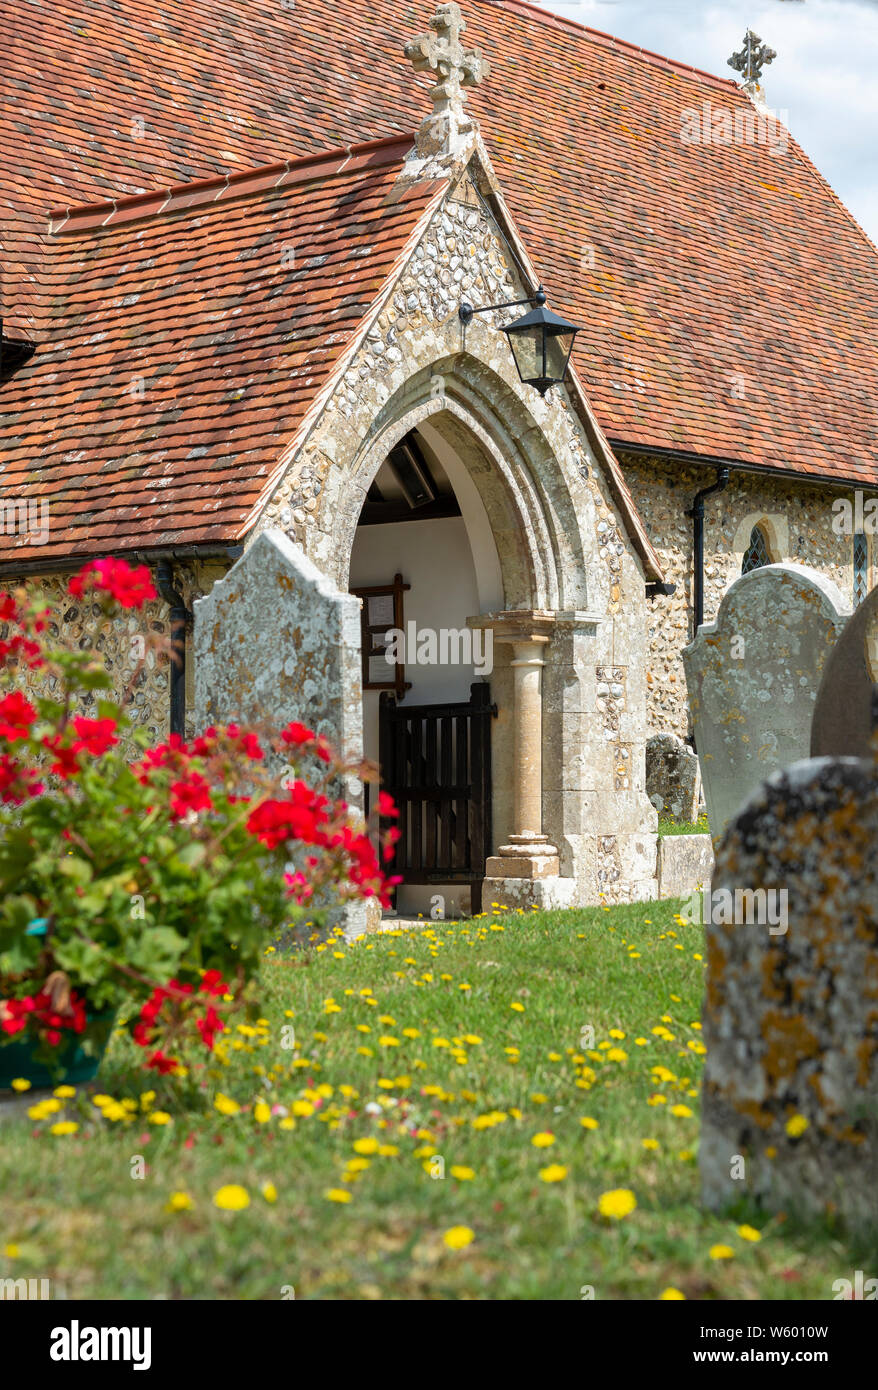 The church porch of the Anglican St Nicholas Church, West Itchenor, Chichester Harbour, Chichester, West Sussex, England, United Kingdom Stock Photo